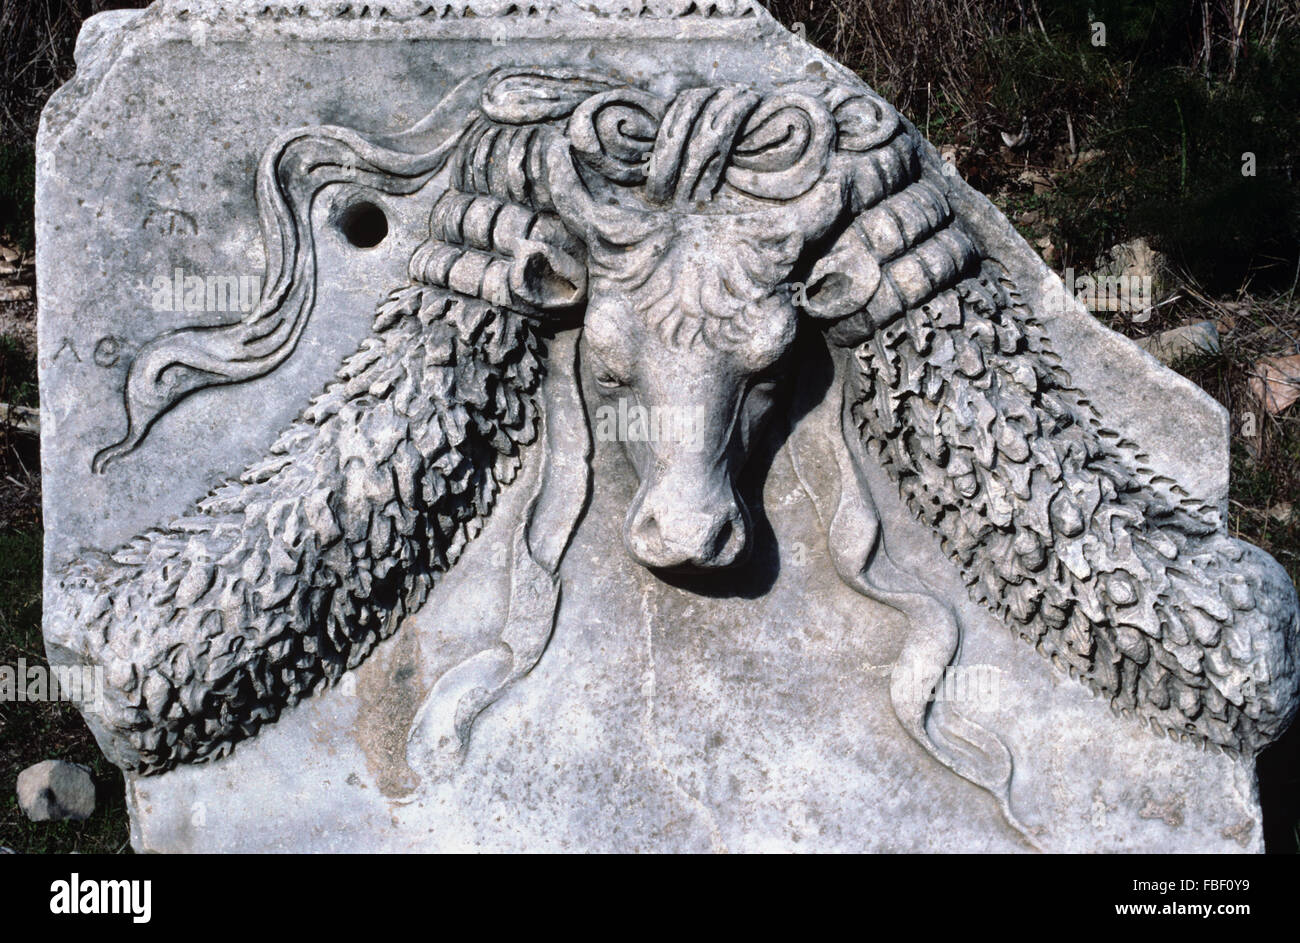 Ancient Greco-Roman Bas-Relief or Sculpture of a Bull's Head and Floral Design or Garland on the Arcadian Way (c2nd) Ephesus, Selçuk, Turkey Stock Photo